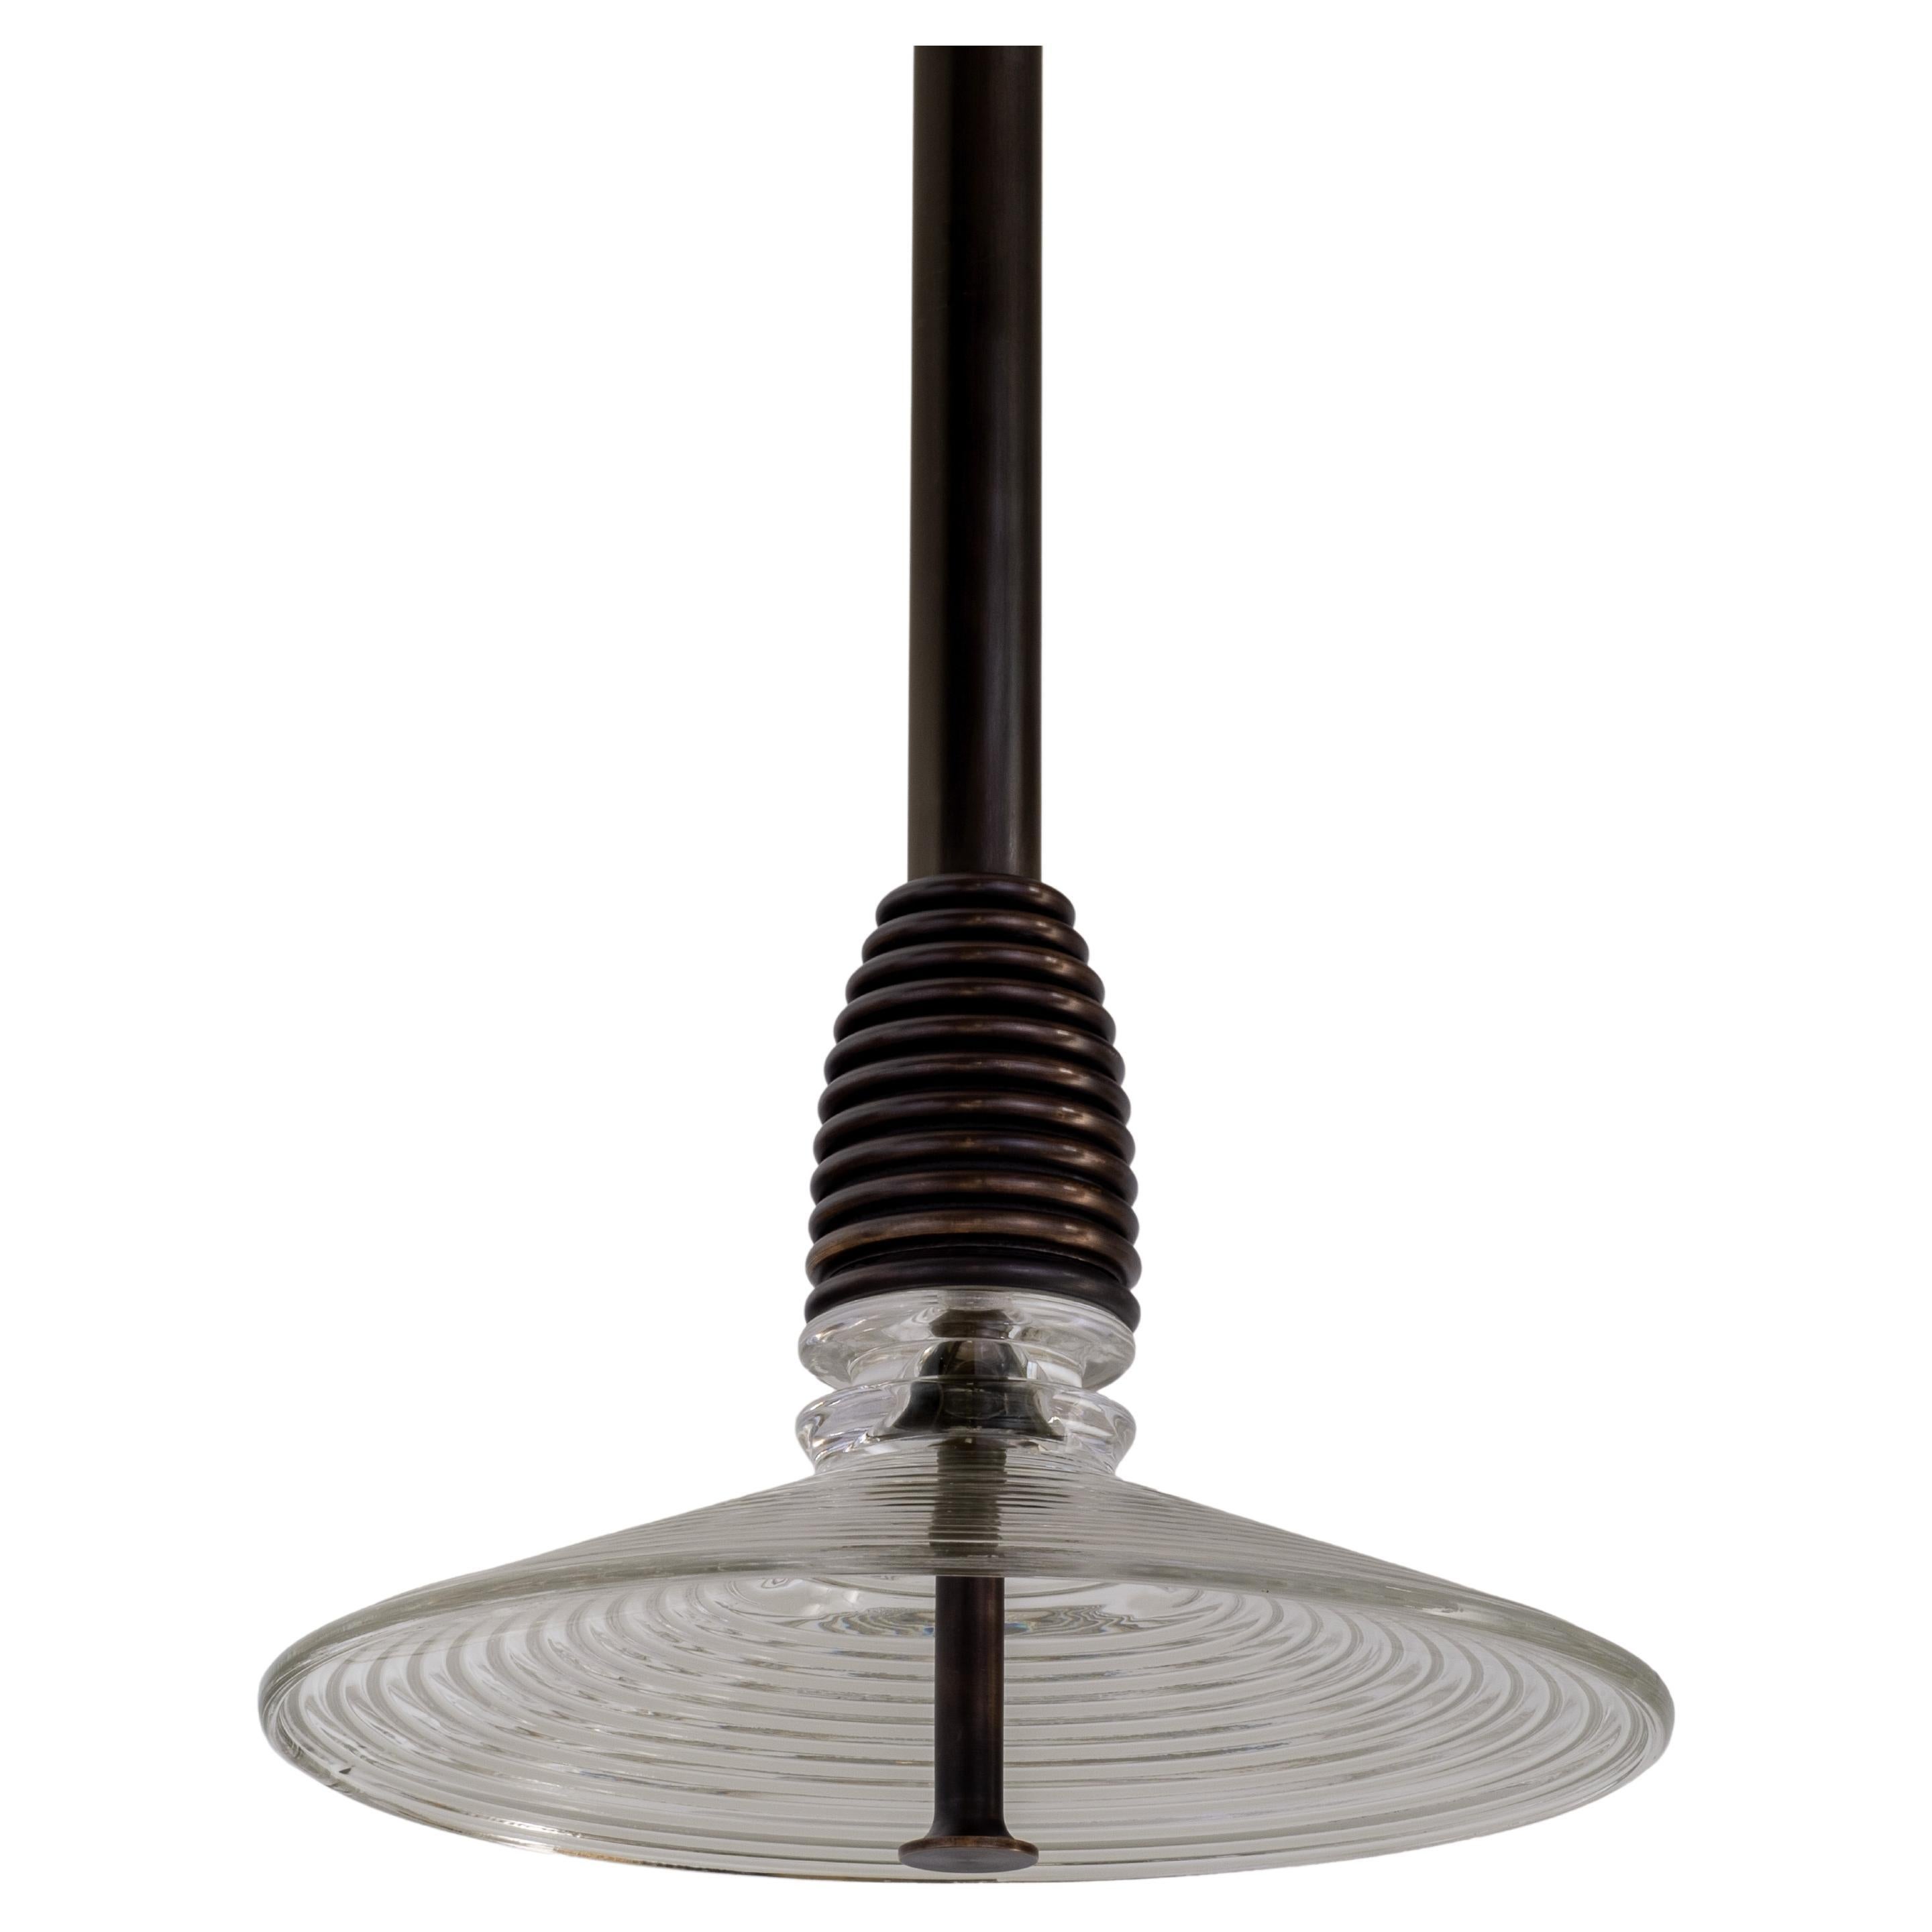 The Insulator 'B' Pendant in dark brass and clear glass by NOVOCASTRIAN deco For Sale